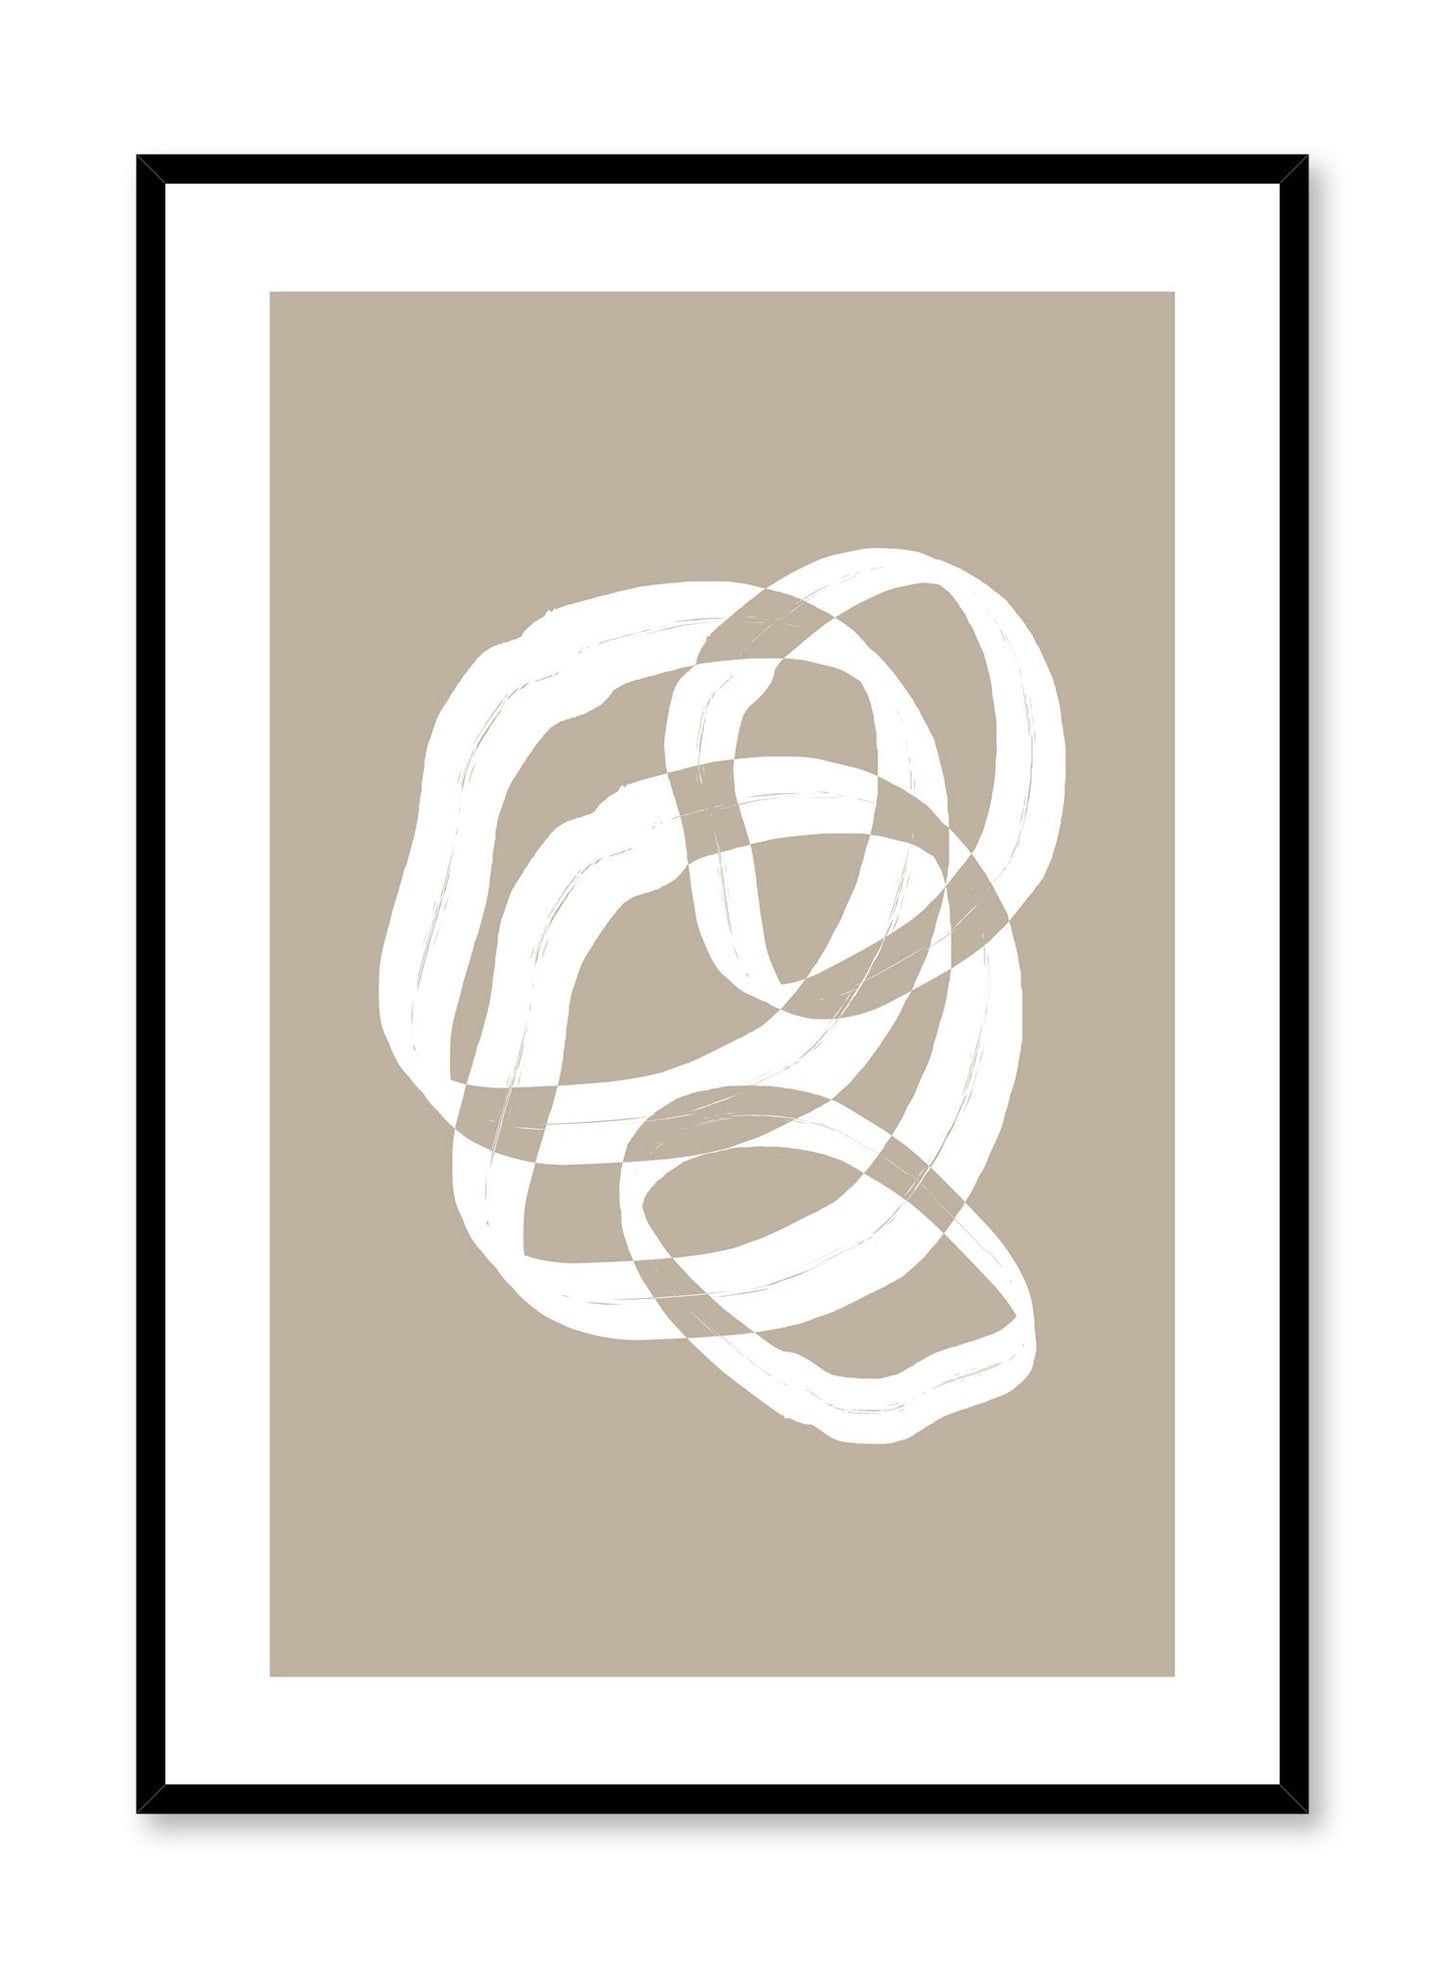 Minimalist design poster by Opposite Wall with abstract beige checkered circles